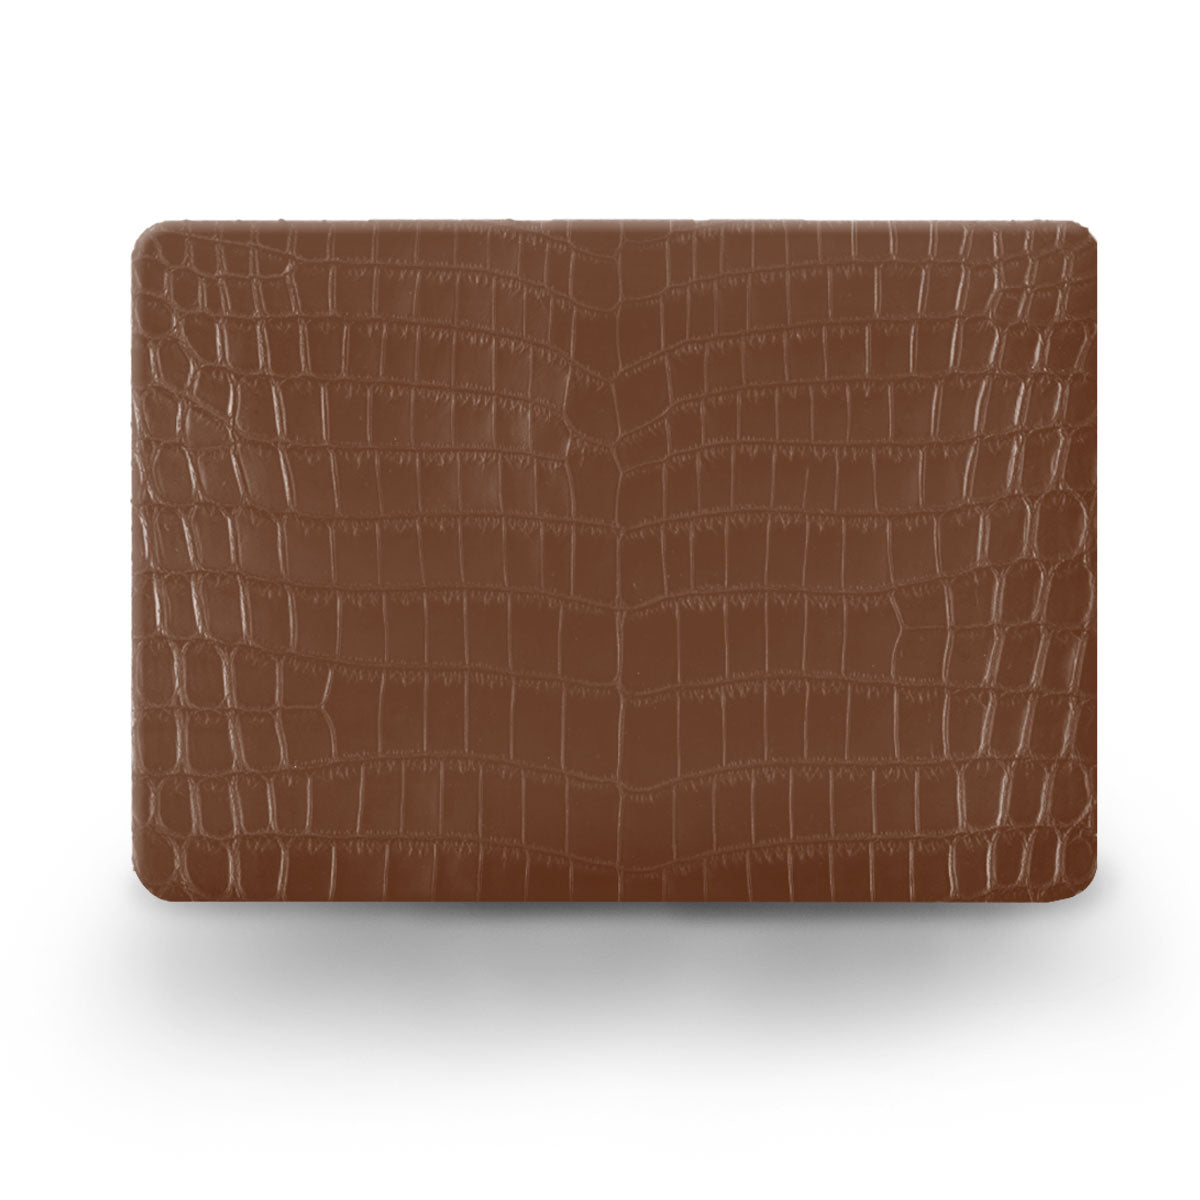 Leather Macbook case / back cover - Macbook Pro & Air (13, 14, 15 and 16 inches) - Genuine alligator